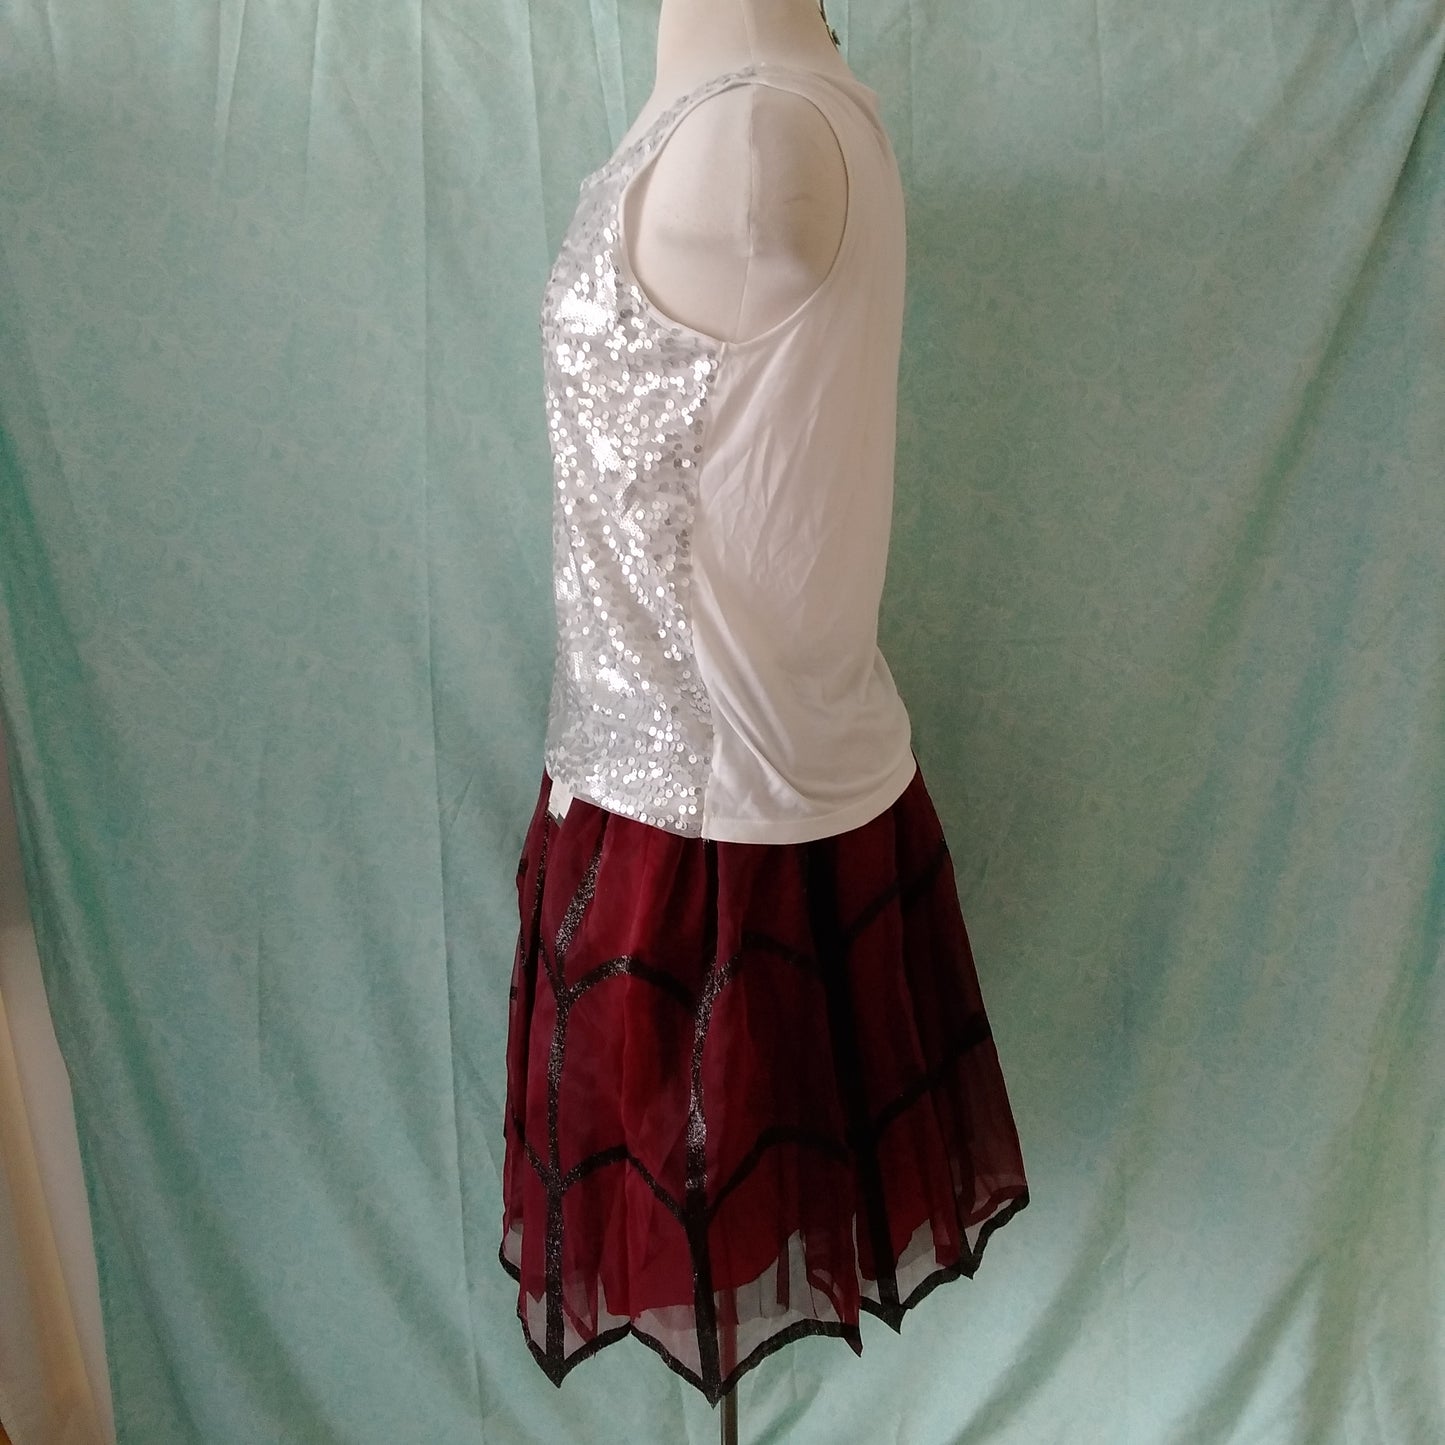 Burgundy and Black Adult Tutu NWT- One size fits most